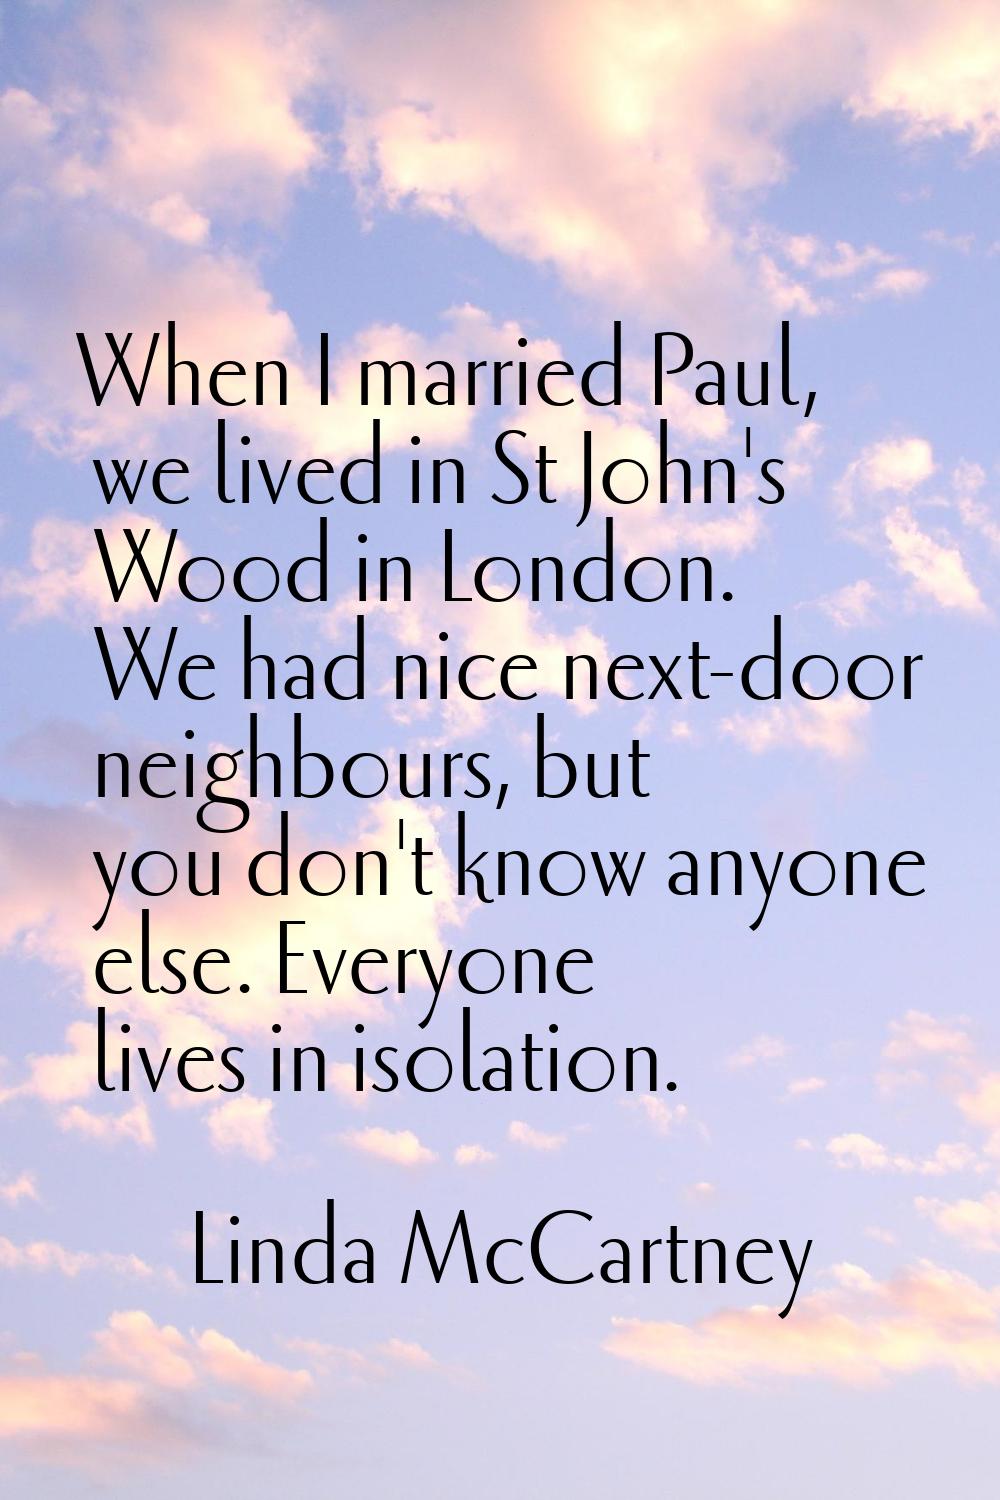 When I married Paul, we lived in St John's Wood in London. We had nice next-door neighbours, but yo